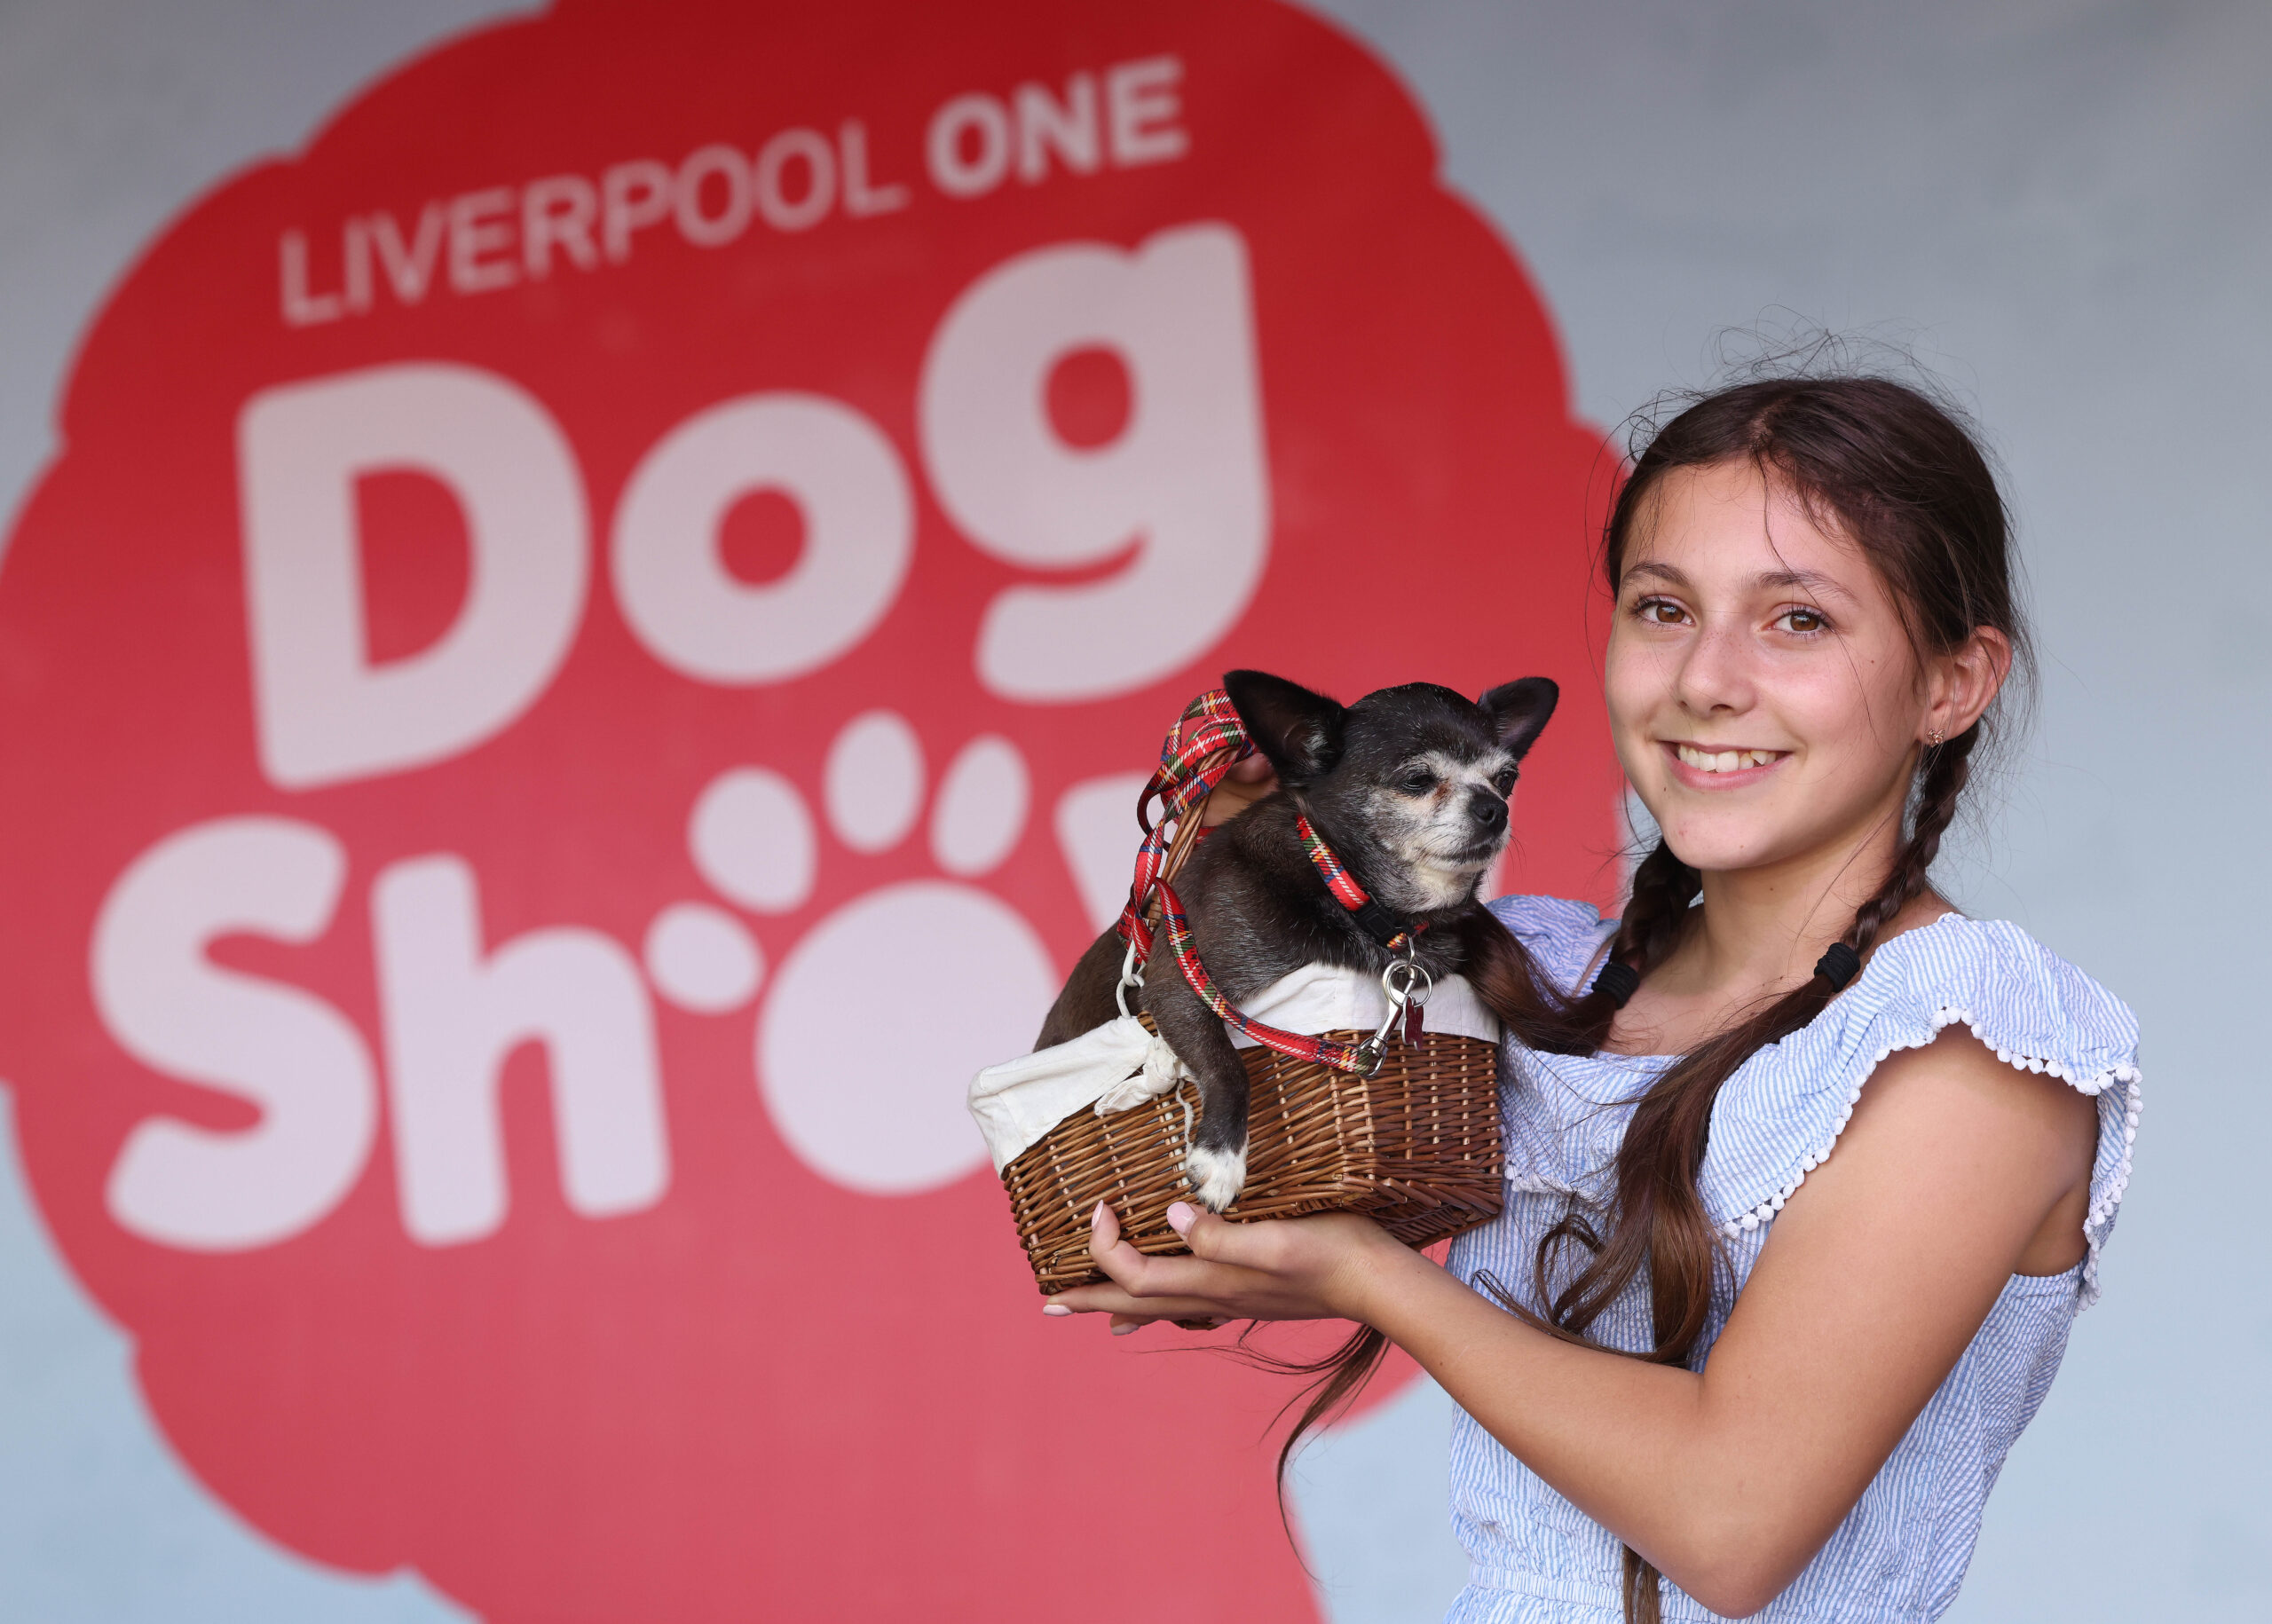 Liverpool ONE Dog Show - The Guide Liverpool